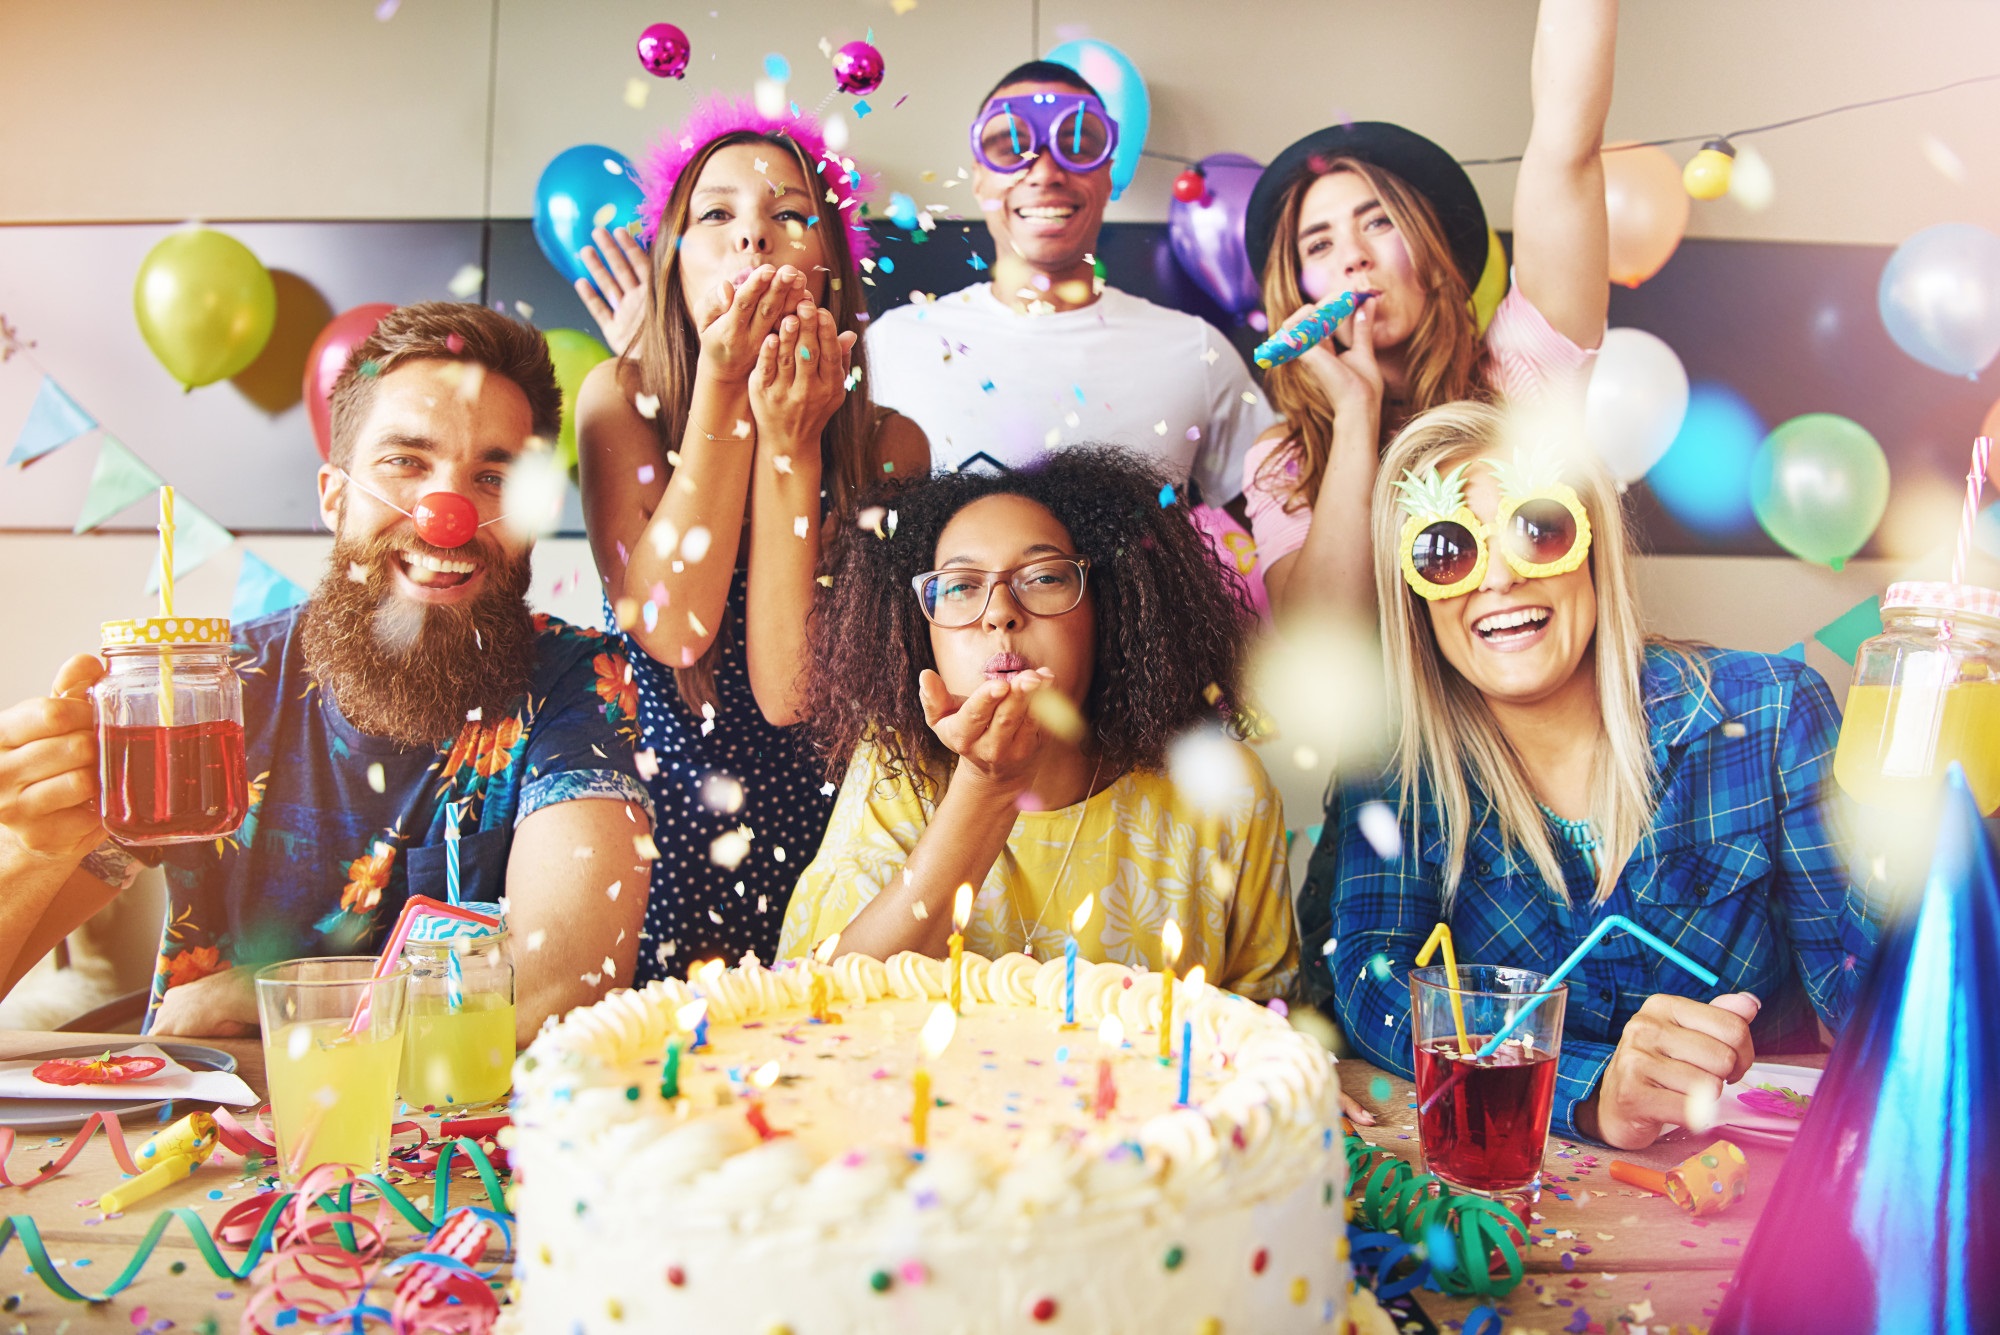 The Top Creative Themes for an Adult Birthday Party